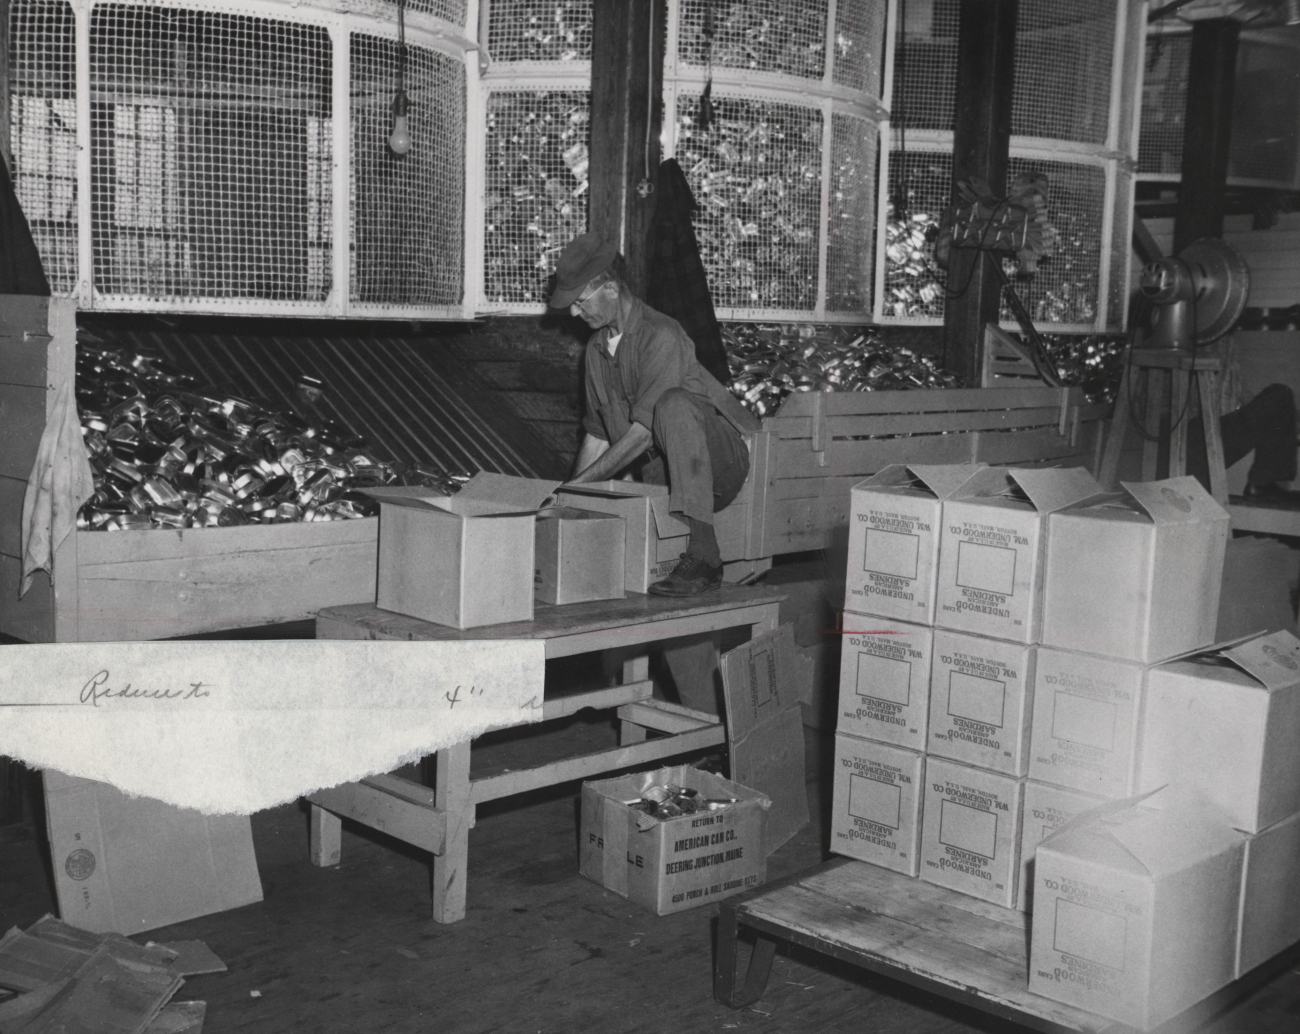 Putting cans of sardines into cartons at a sardine canning plant